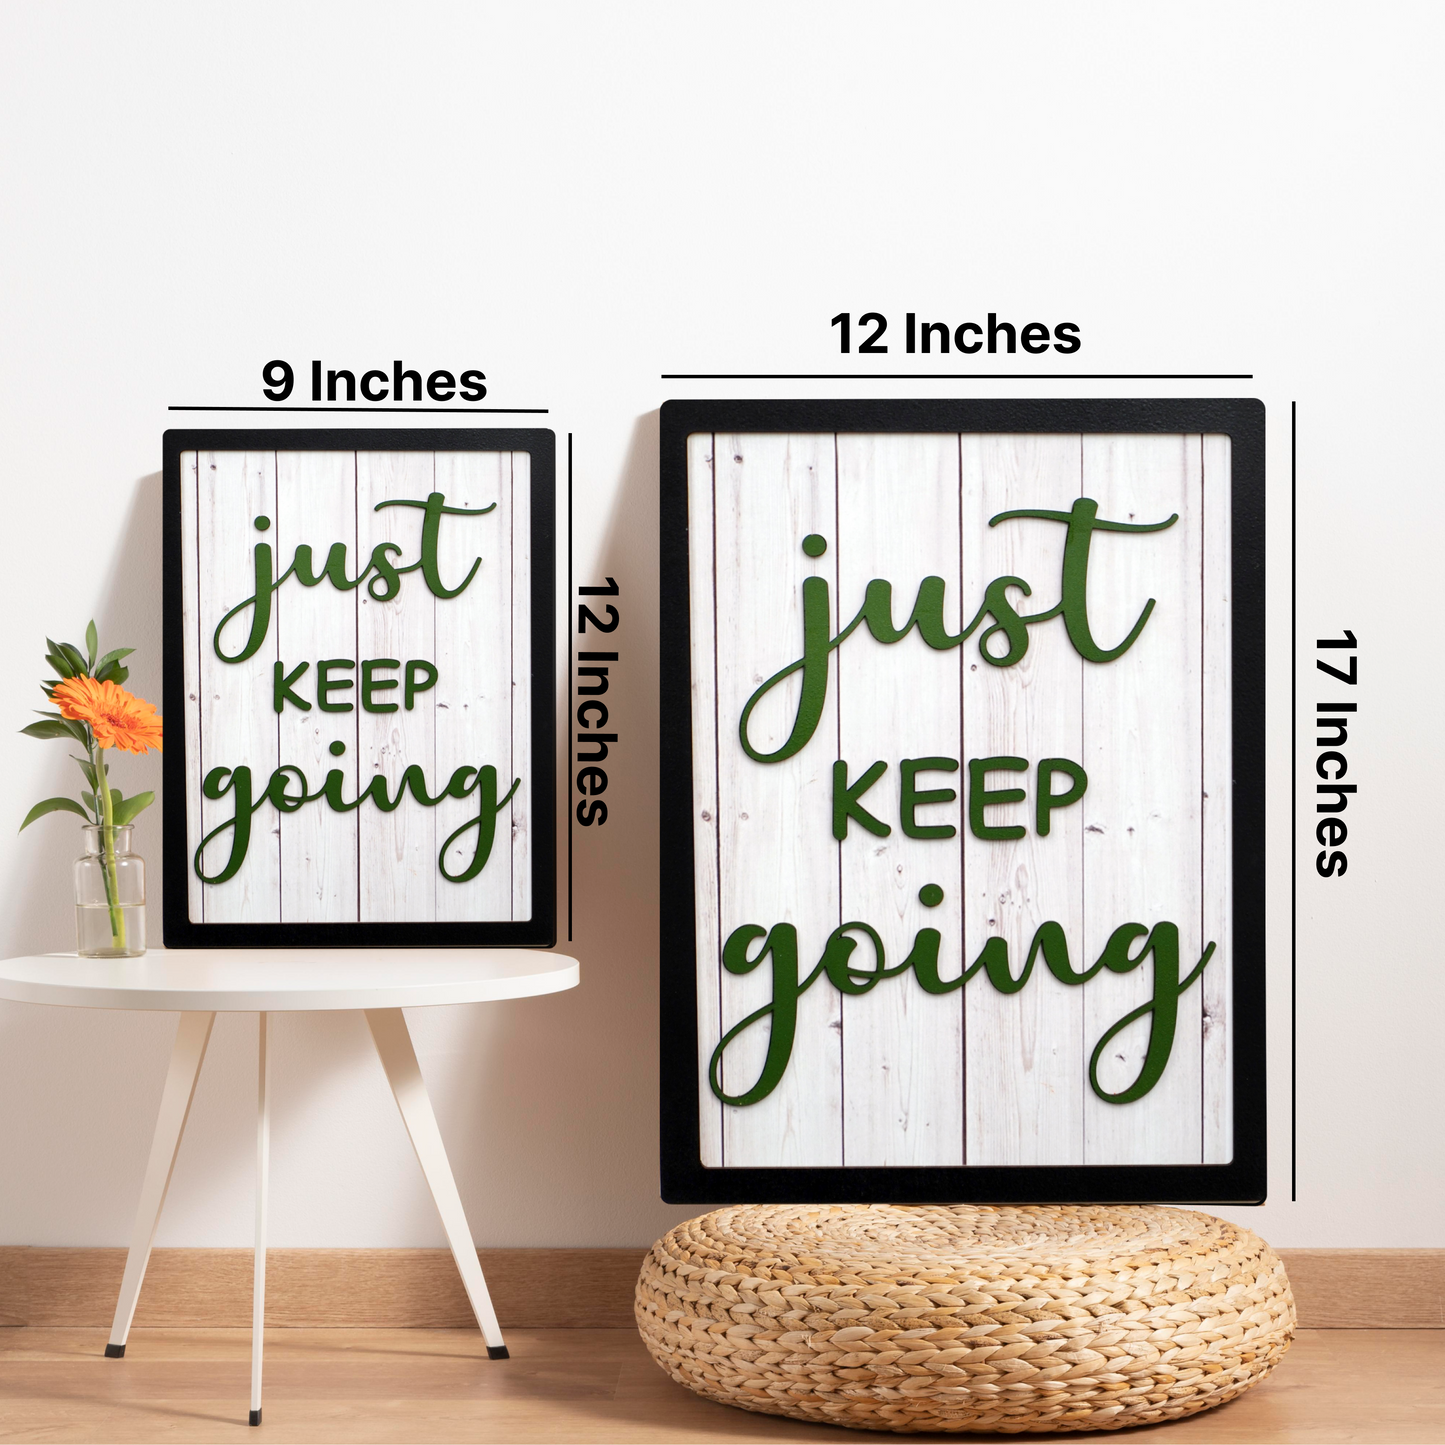 YES YOU CAN, JUST KEEP GOING, FOCUS ON GOOD Motivational Quotes Set of 3